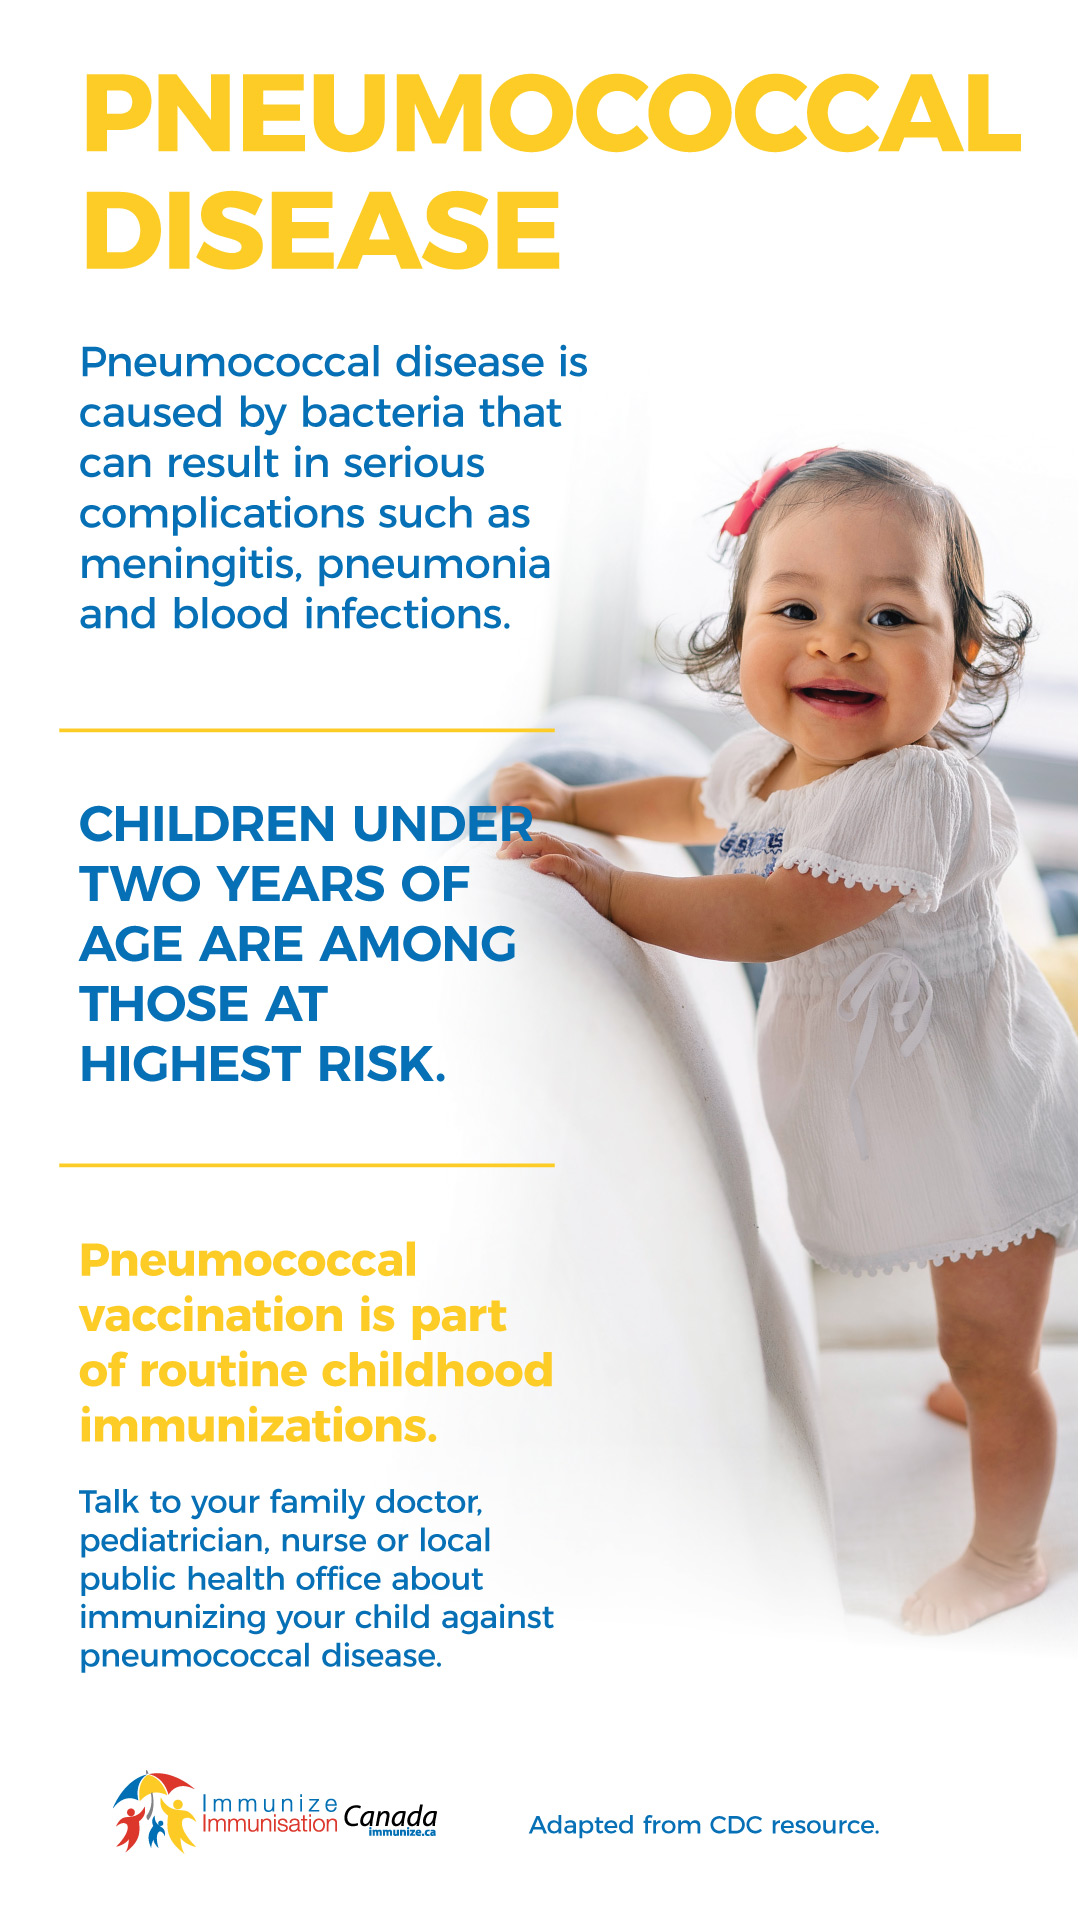 Pneumococcal disease: Children under two years of age (social media image for Instagram Story)